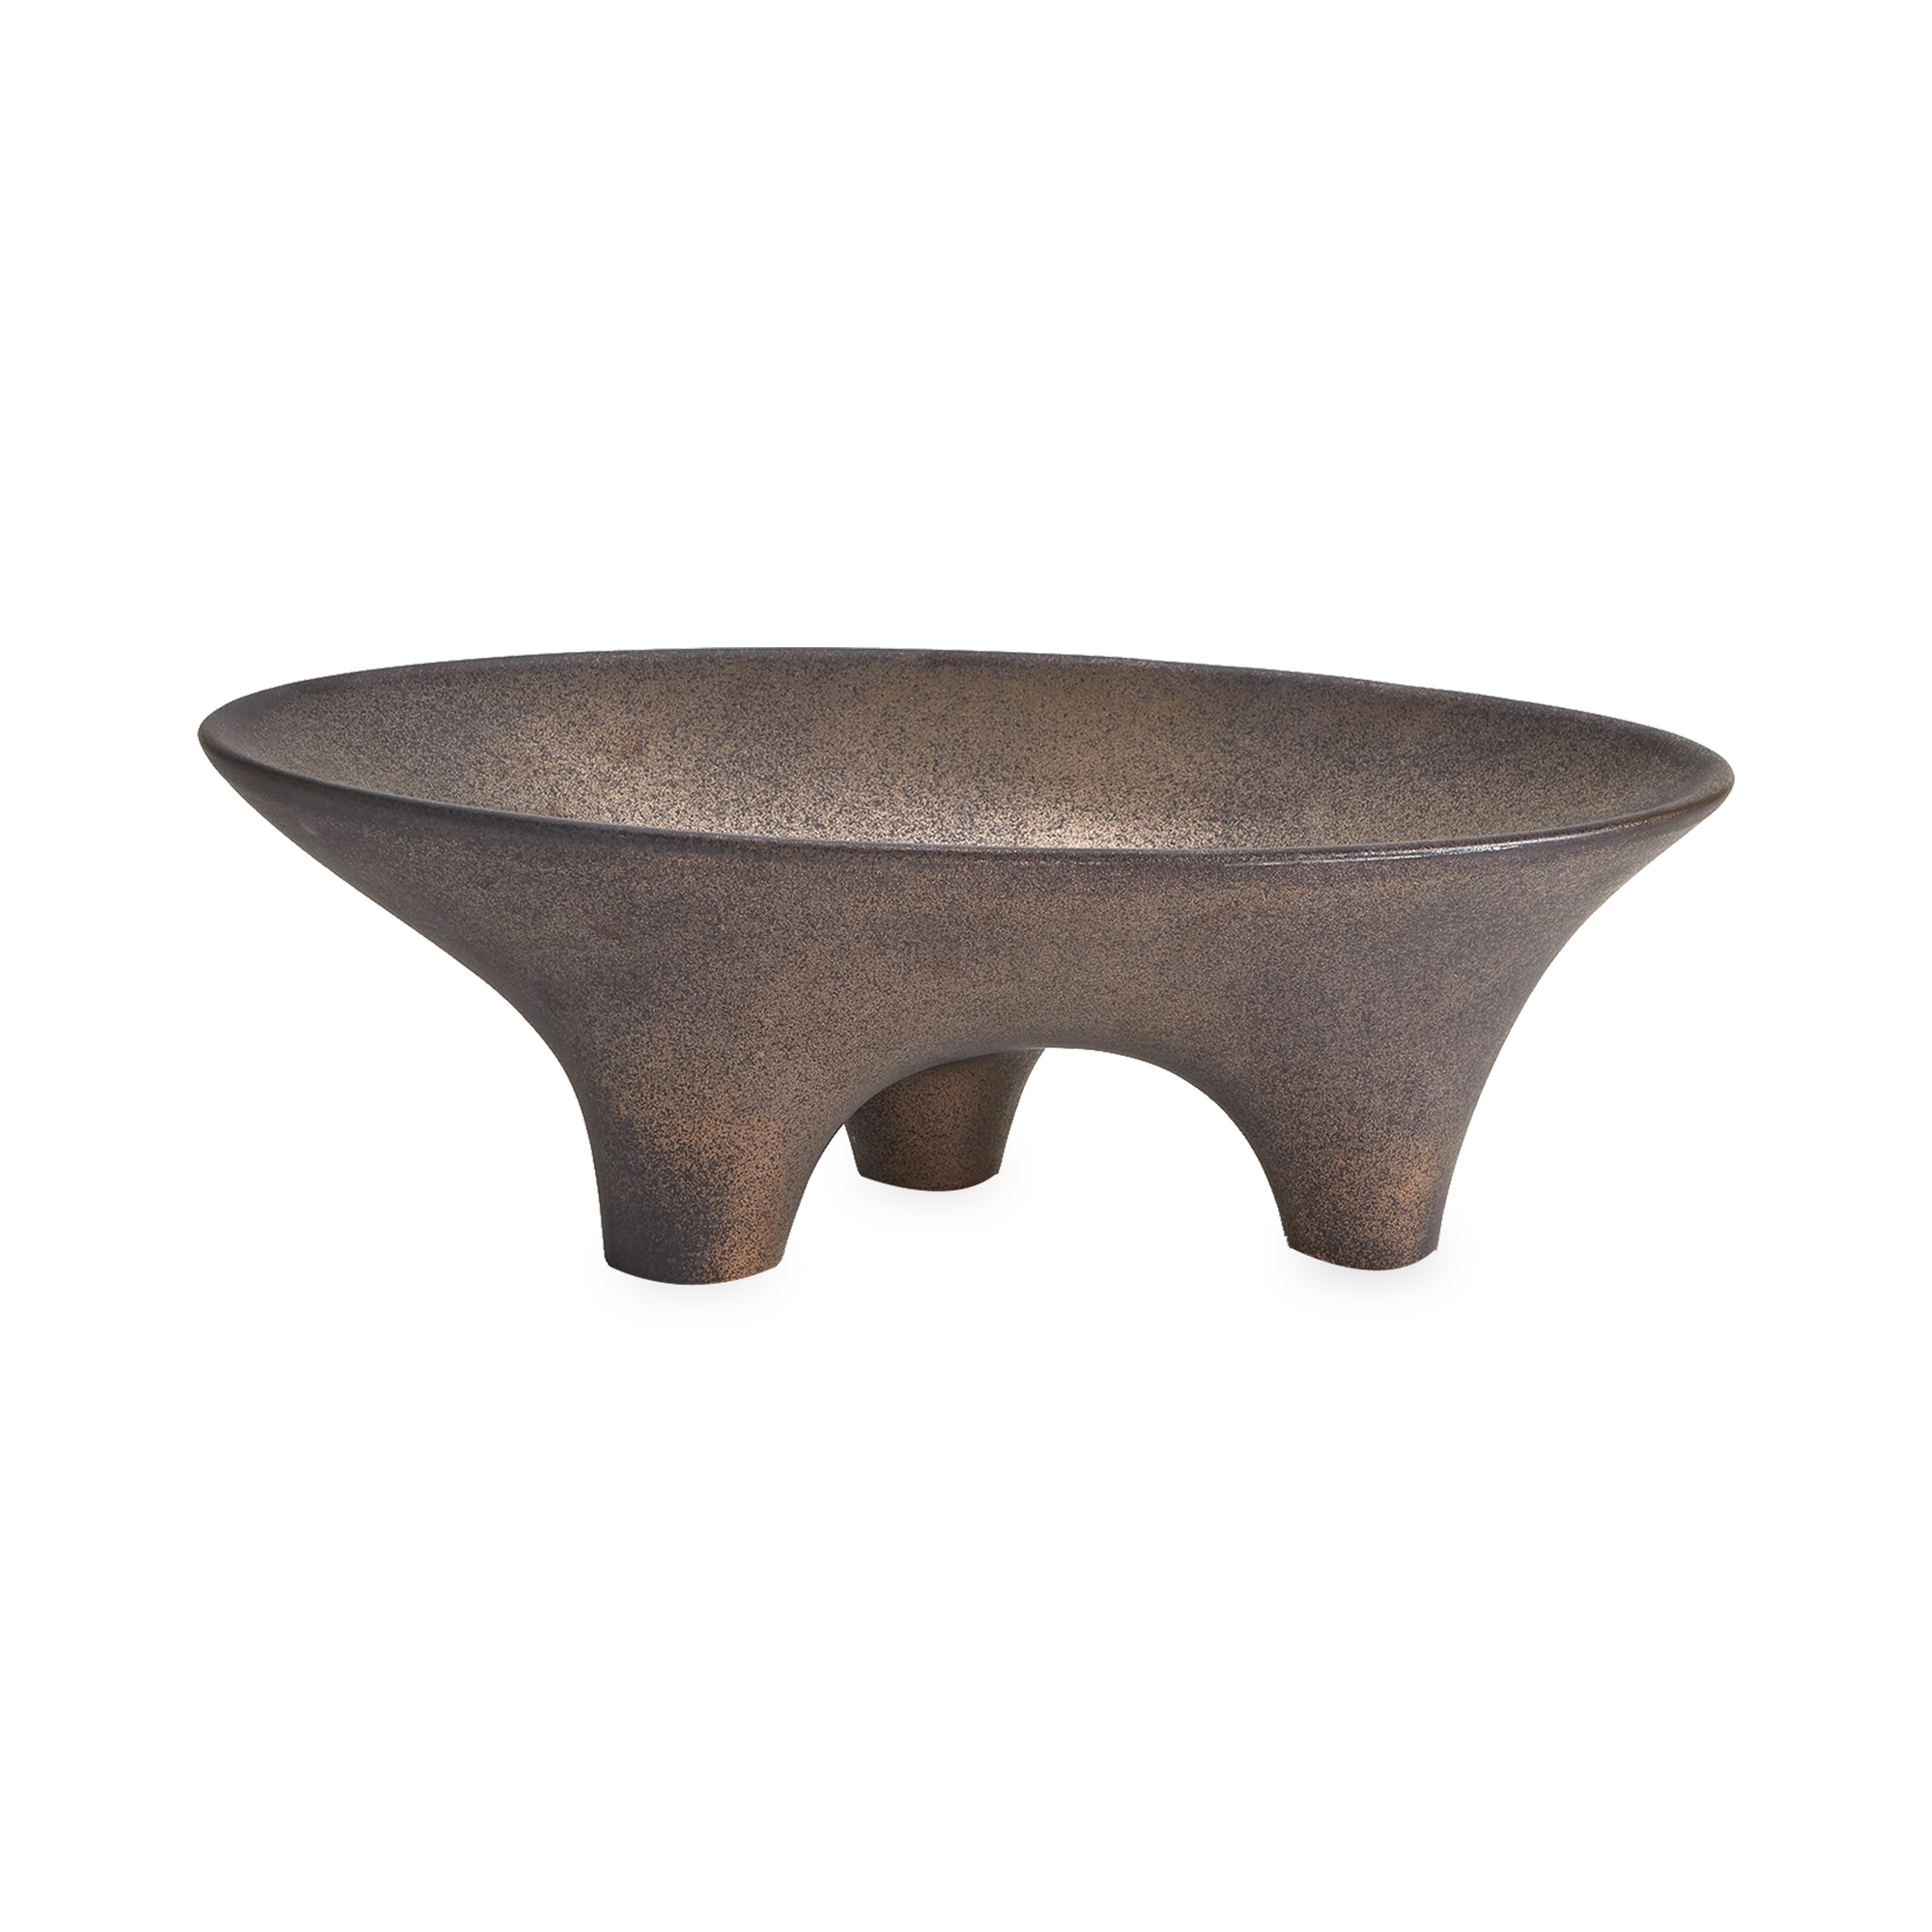 The Opus Leg Bowl is a smooth clay baked in low heat by artisans from Portugal sealed with a matte glaze giving off an understated radiant finish.